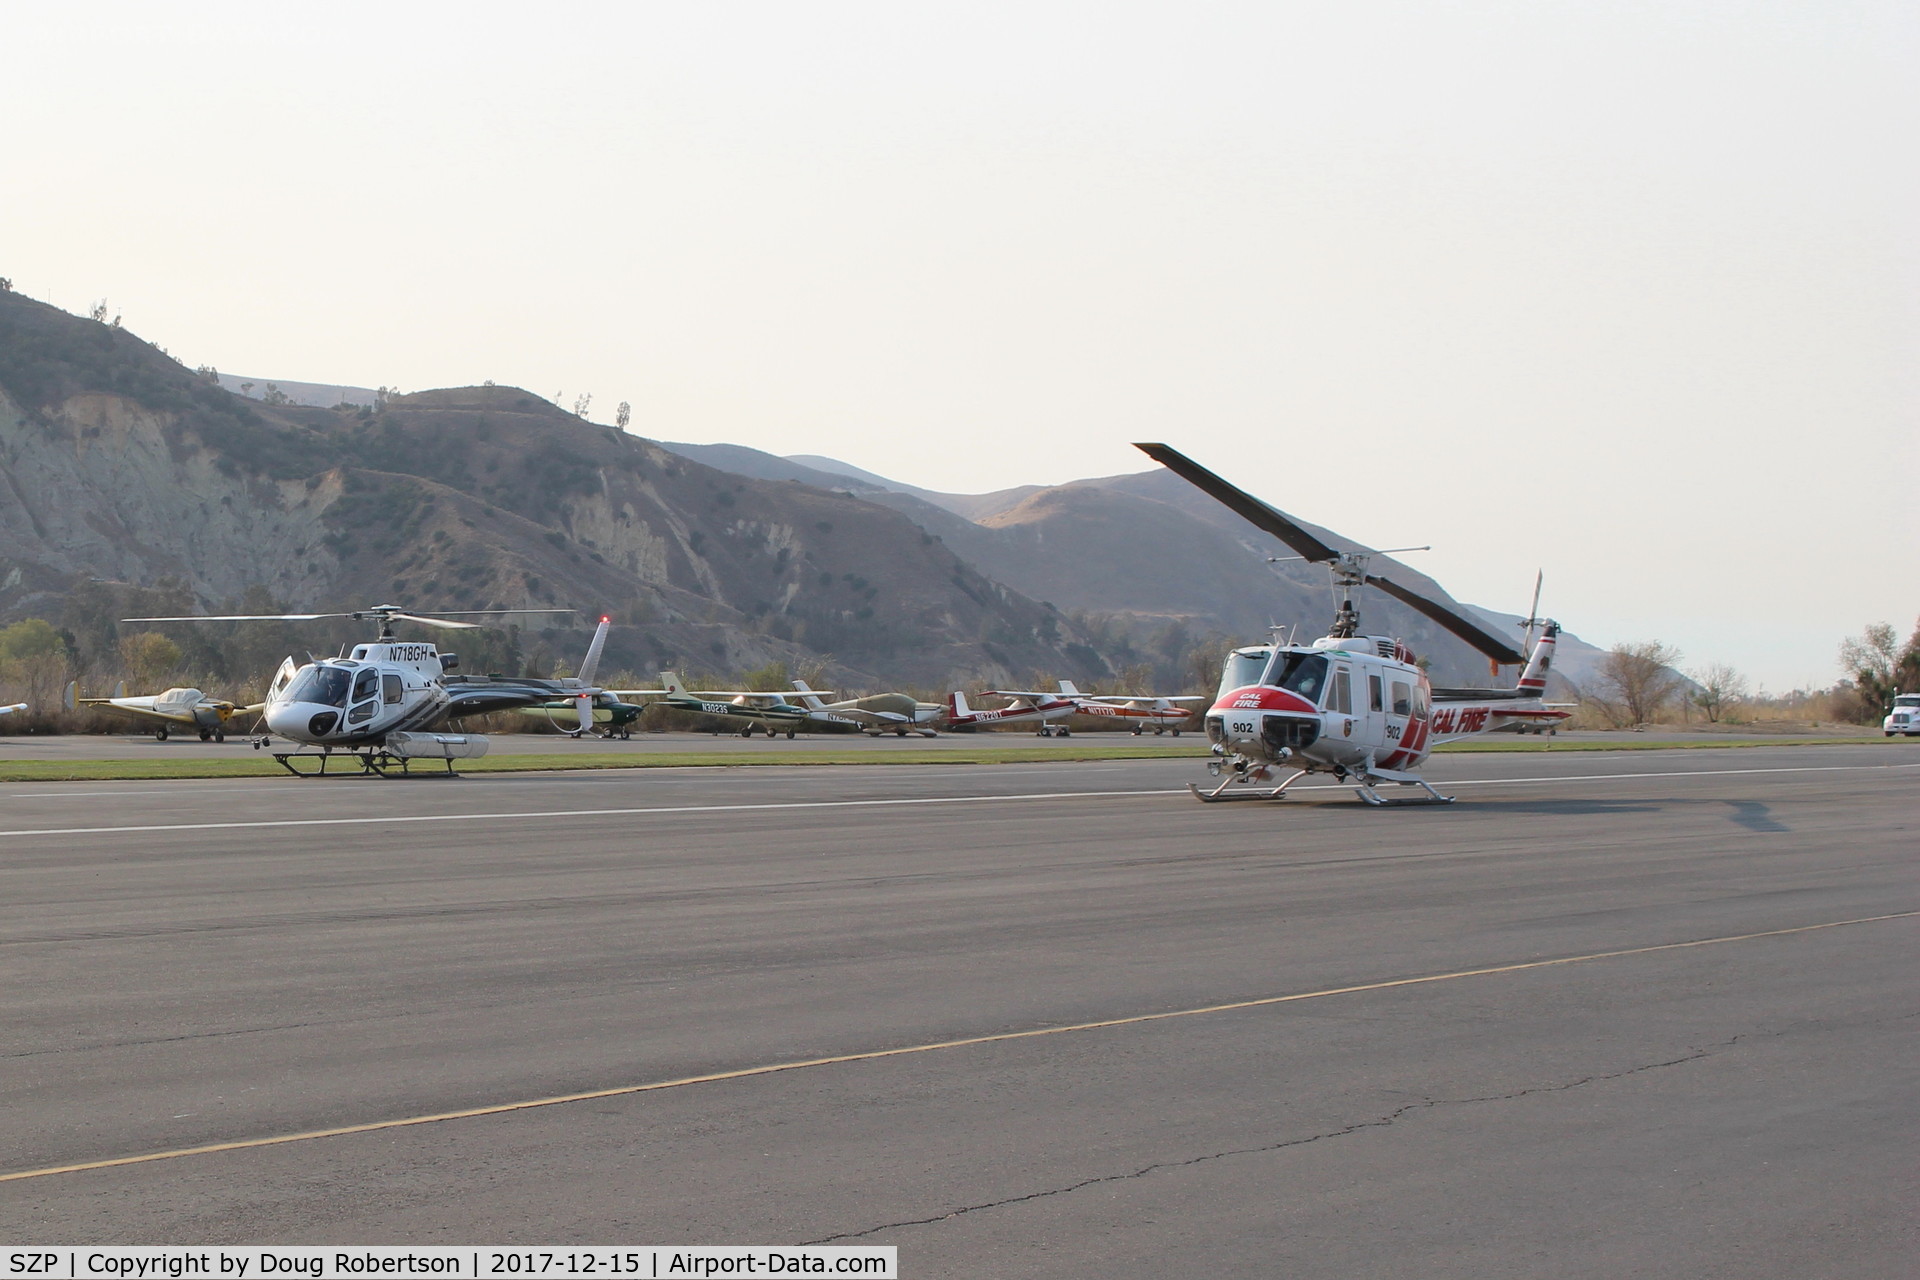 Santa Paula Airport (SZP) - Thomas Fire FireFighting helicopters at SZP Fire HeliBase. N718GH 2001 Eurocopter and CAL-FIRE 902 FireBombers at the ready-